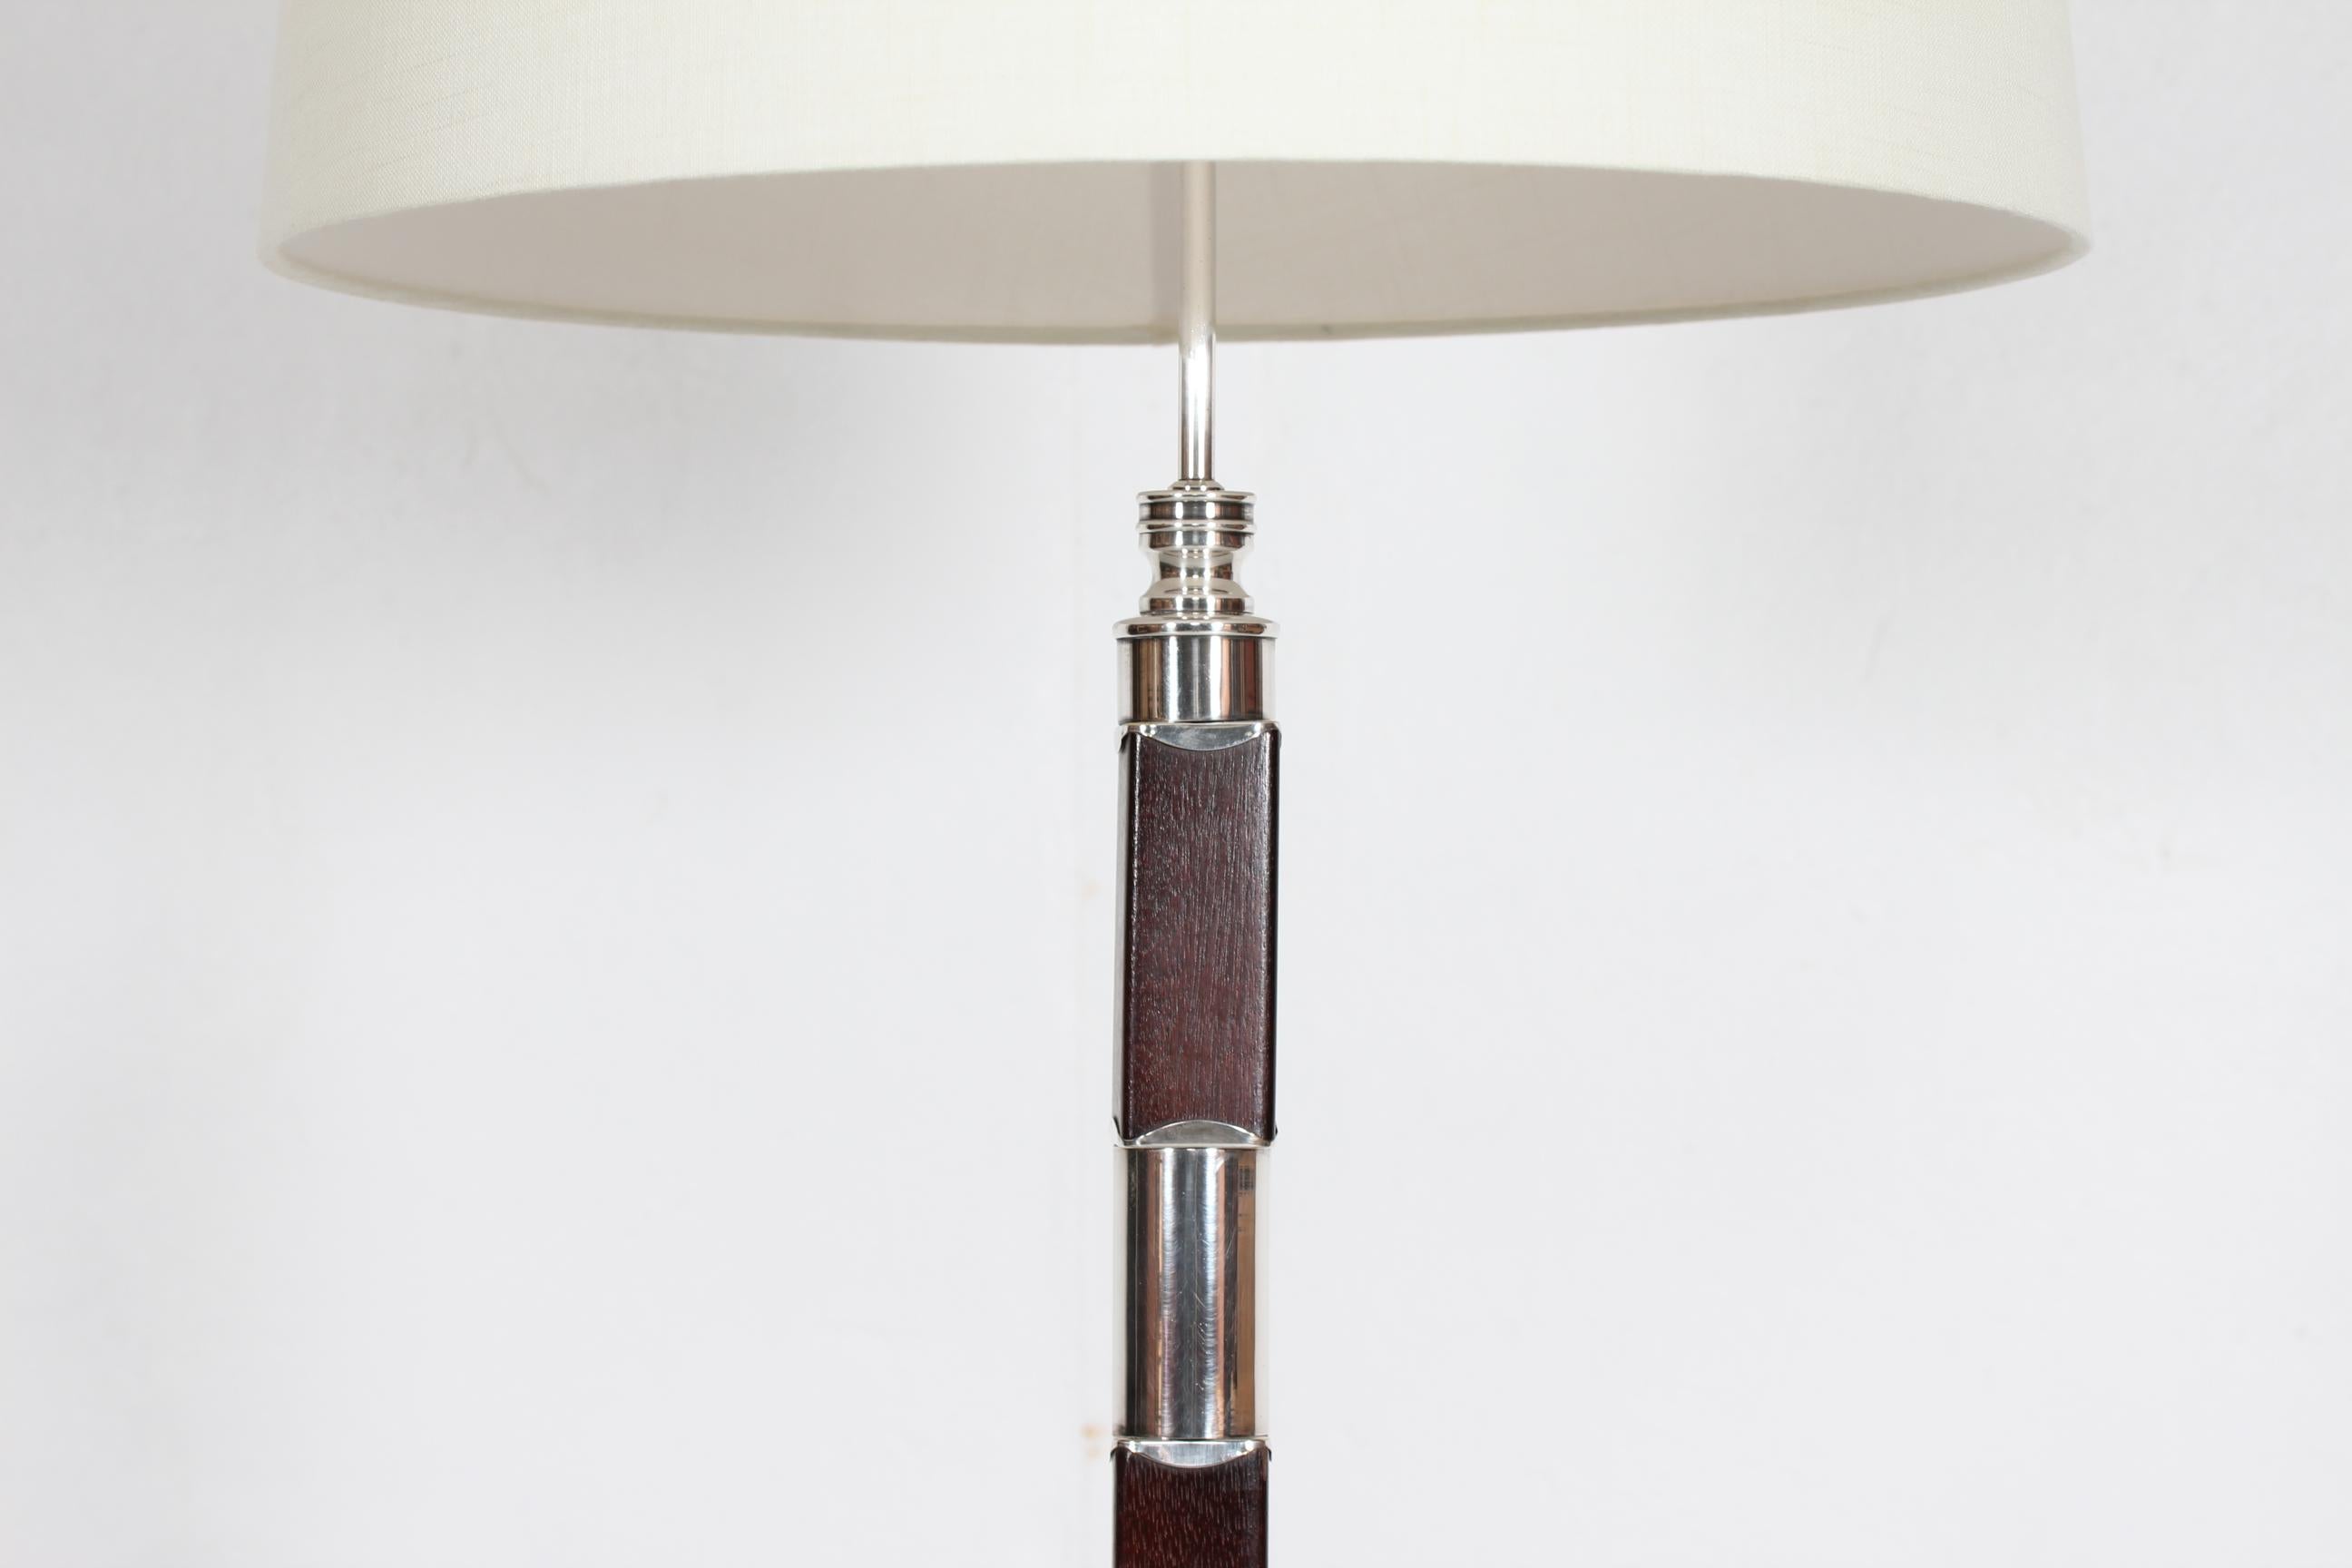 Woven Danish Art Deco Floor Lamp 1940s Silver and Dark Mahogany with New Shade 1940s For Sale